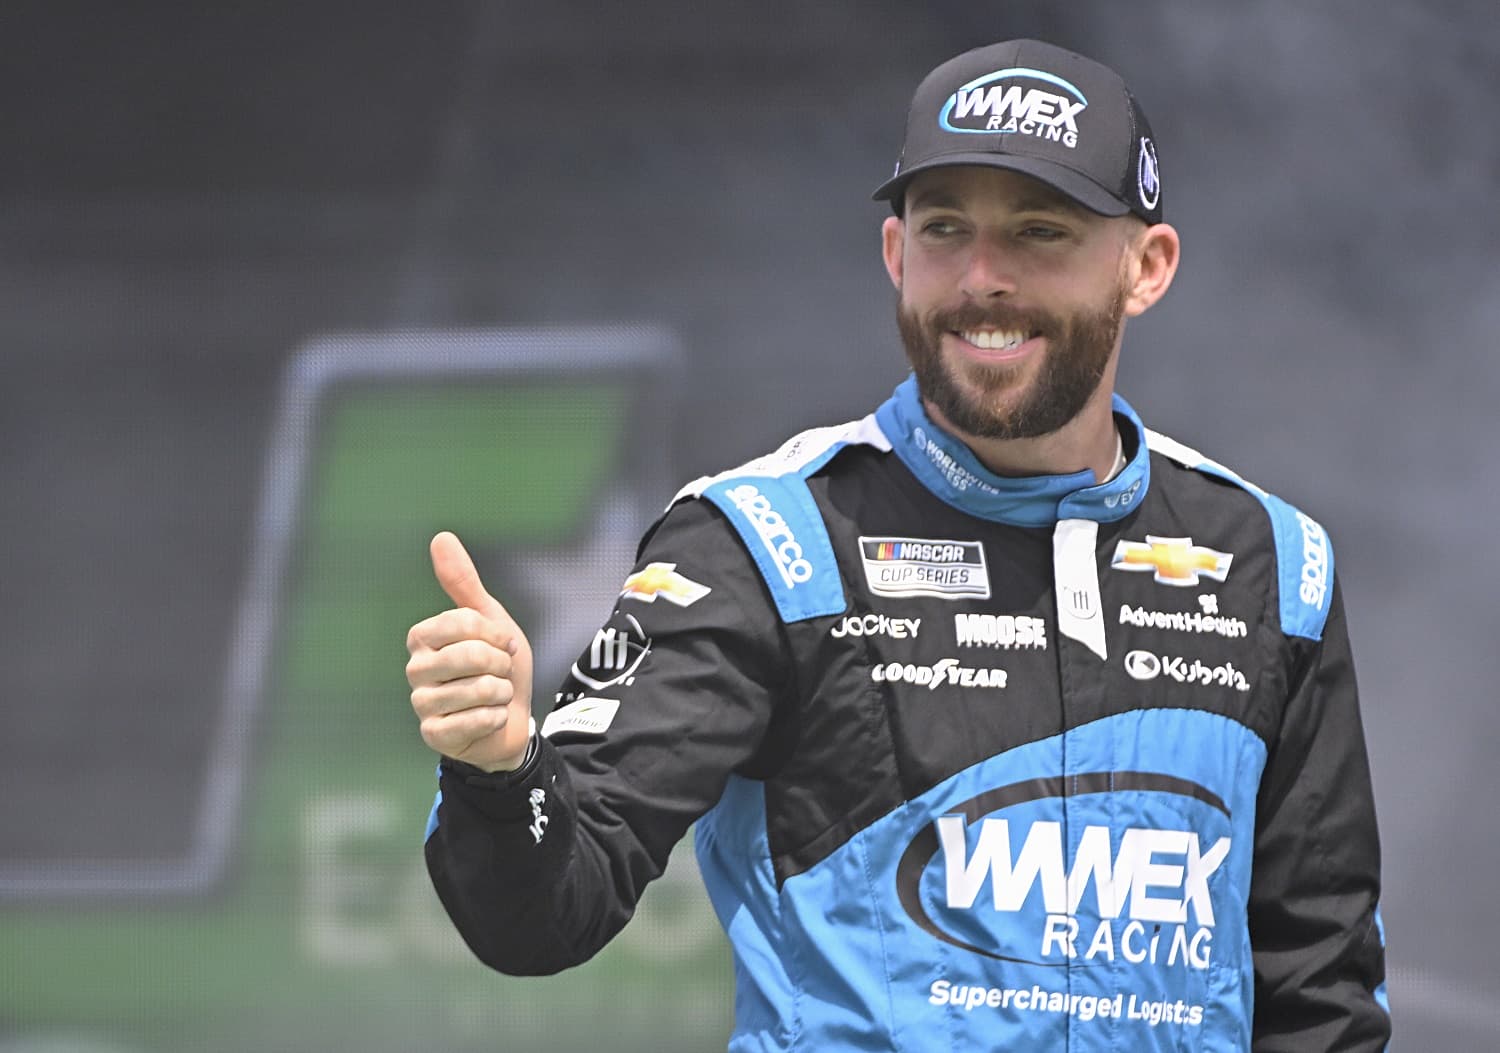 Ross Chastain gives a thumbs-up to fans as he walks onstage during driver intros for the NASCAR Cup Series EchoPark Automotive Grand Prix at Circuit of The Americas on March 26, 2023. | Logan Riely/Getty Images